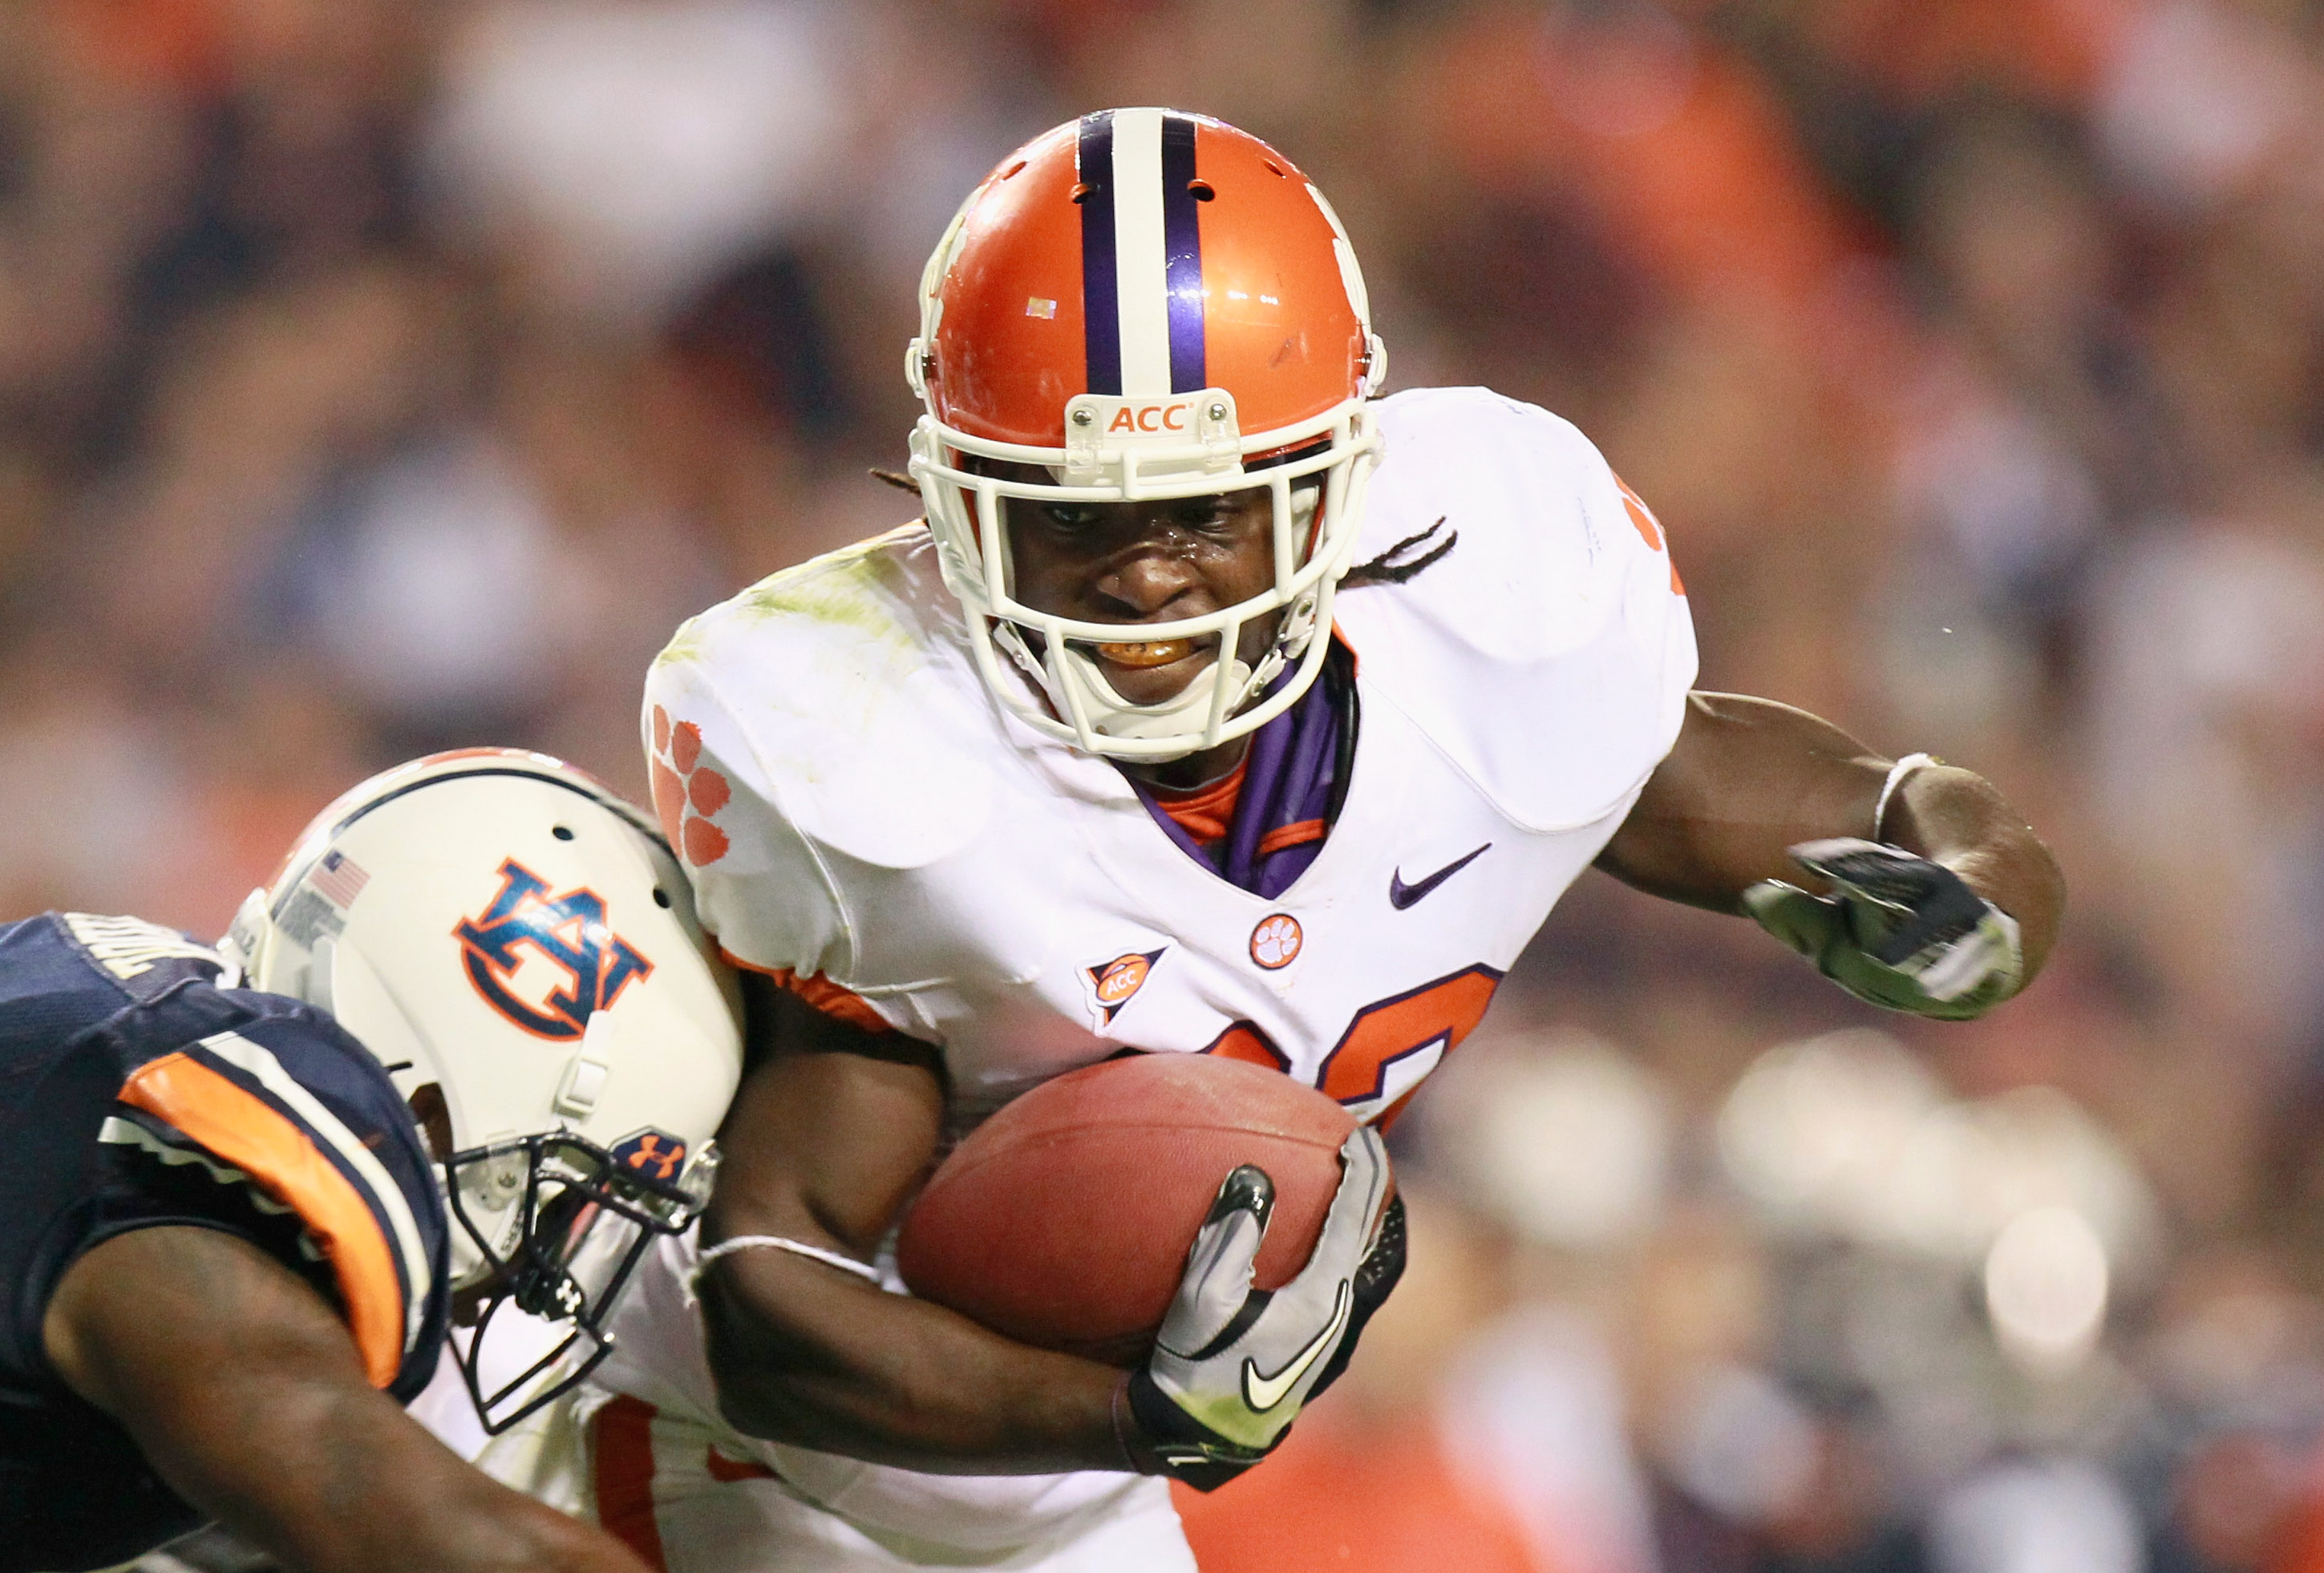 2011 ACC Championship win set stage for Clemson success